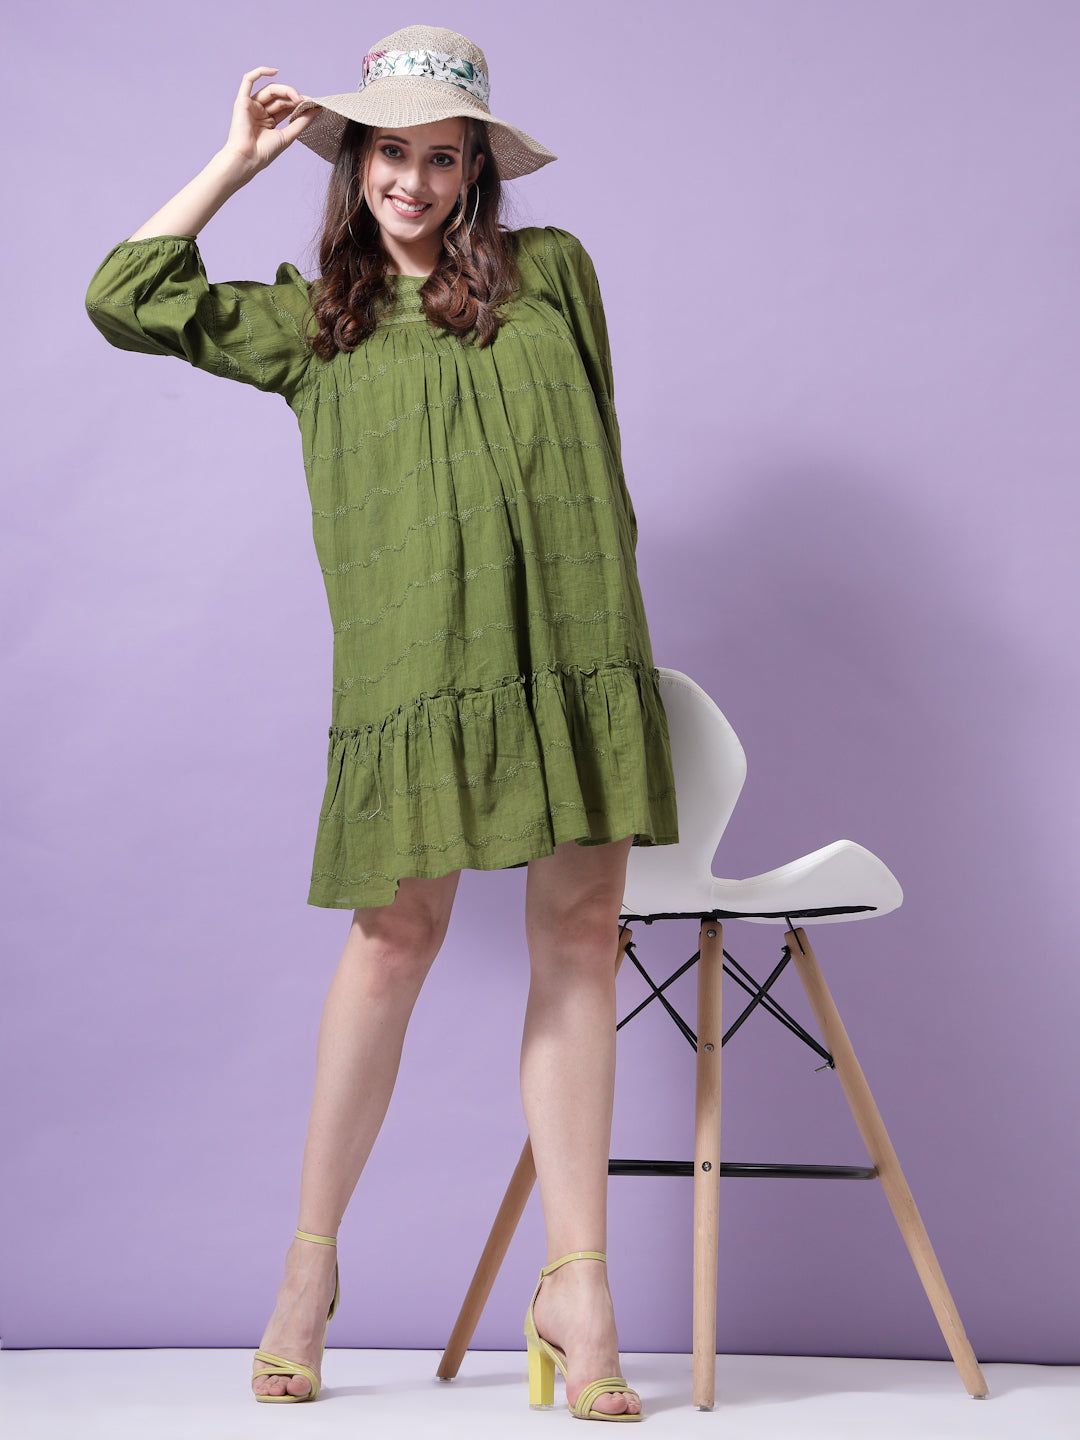 Terquois A-line Casual Dress Emblished with Lace Has Round Neck Dresses TERQUOIS S Green 